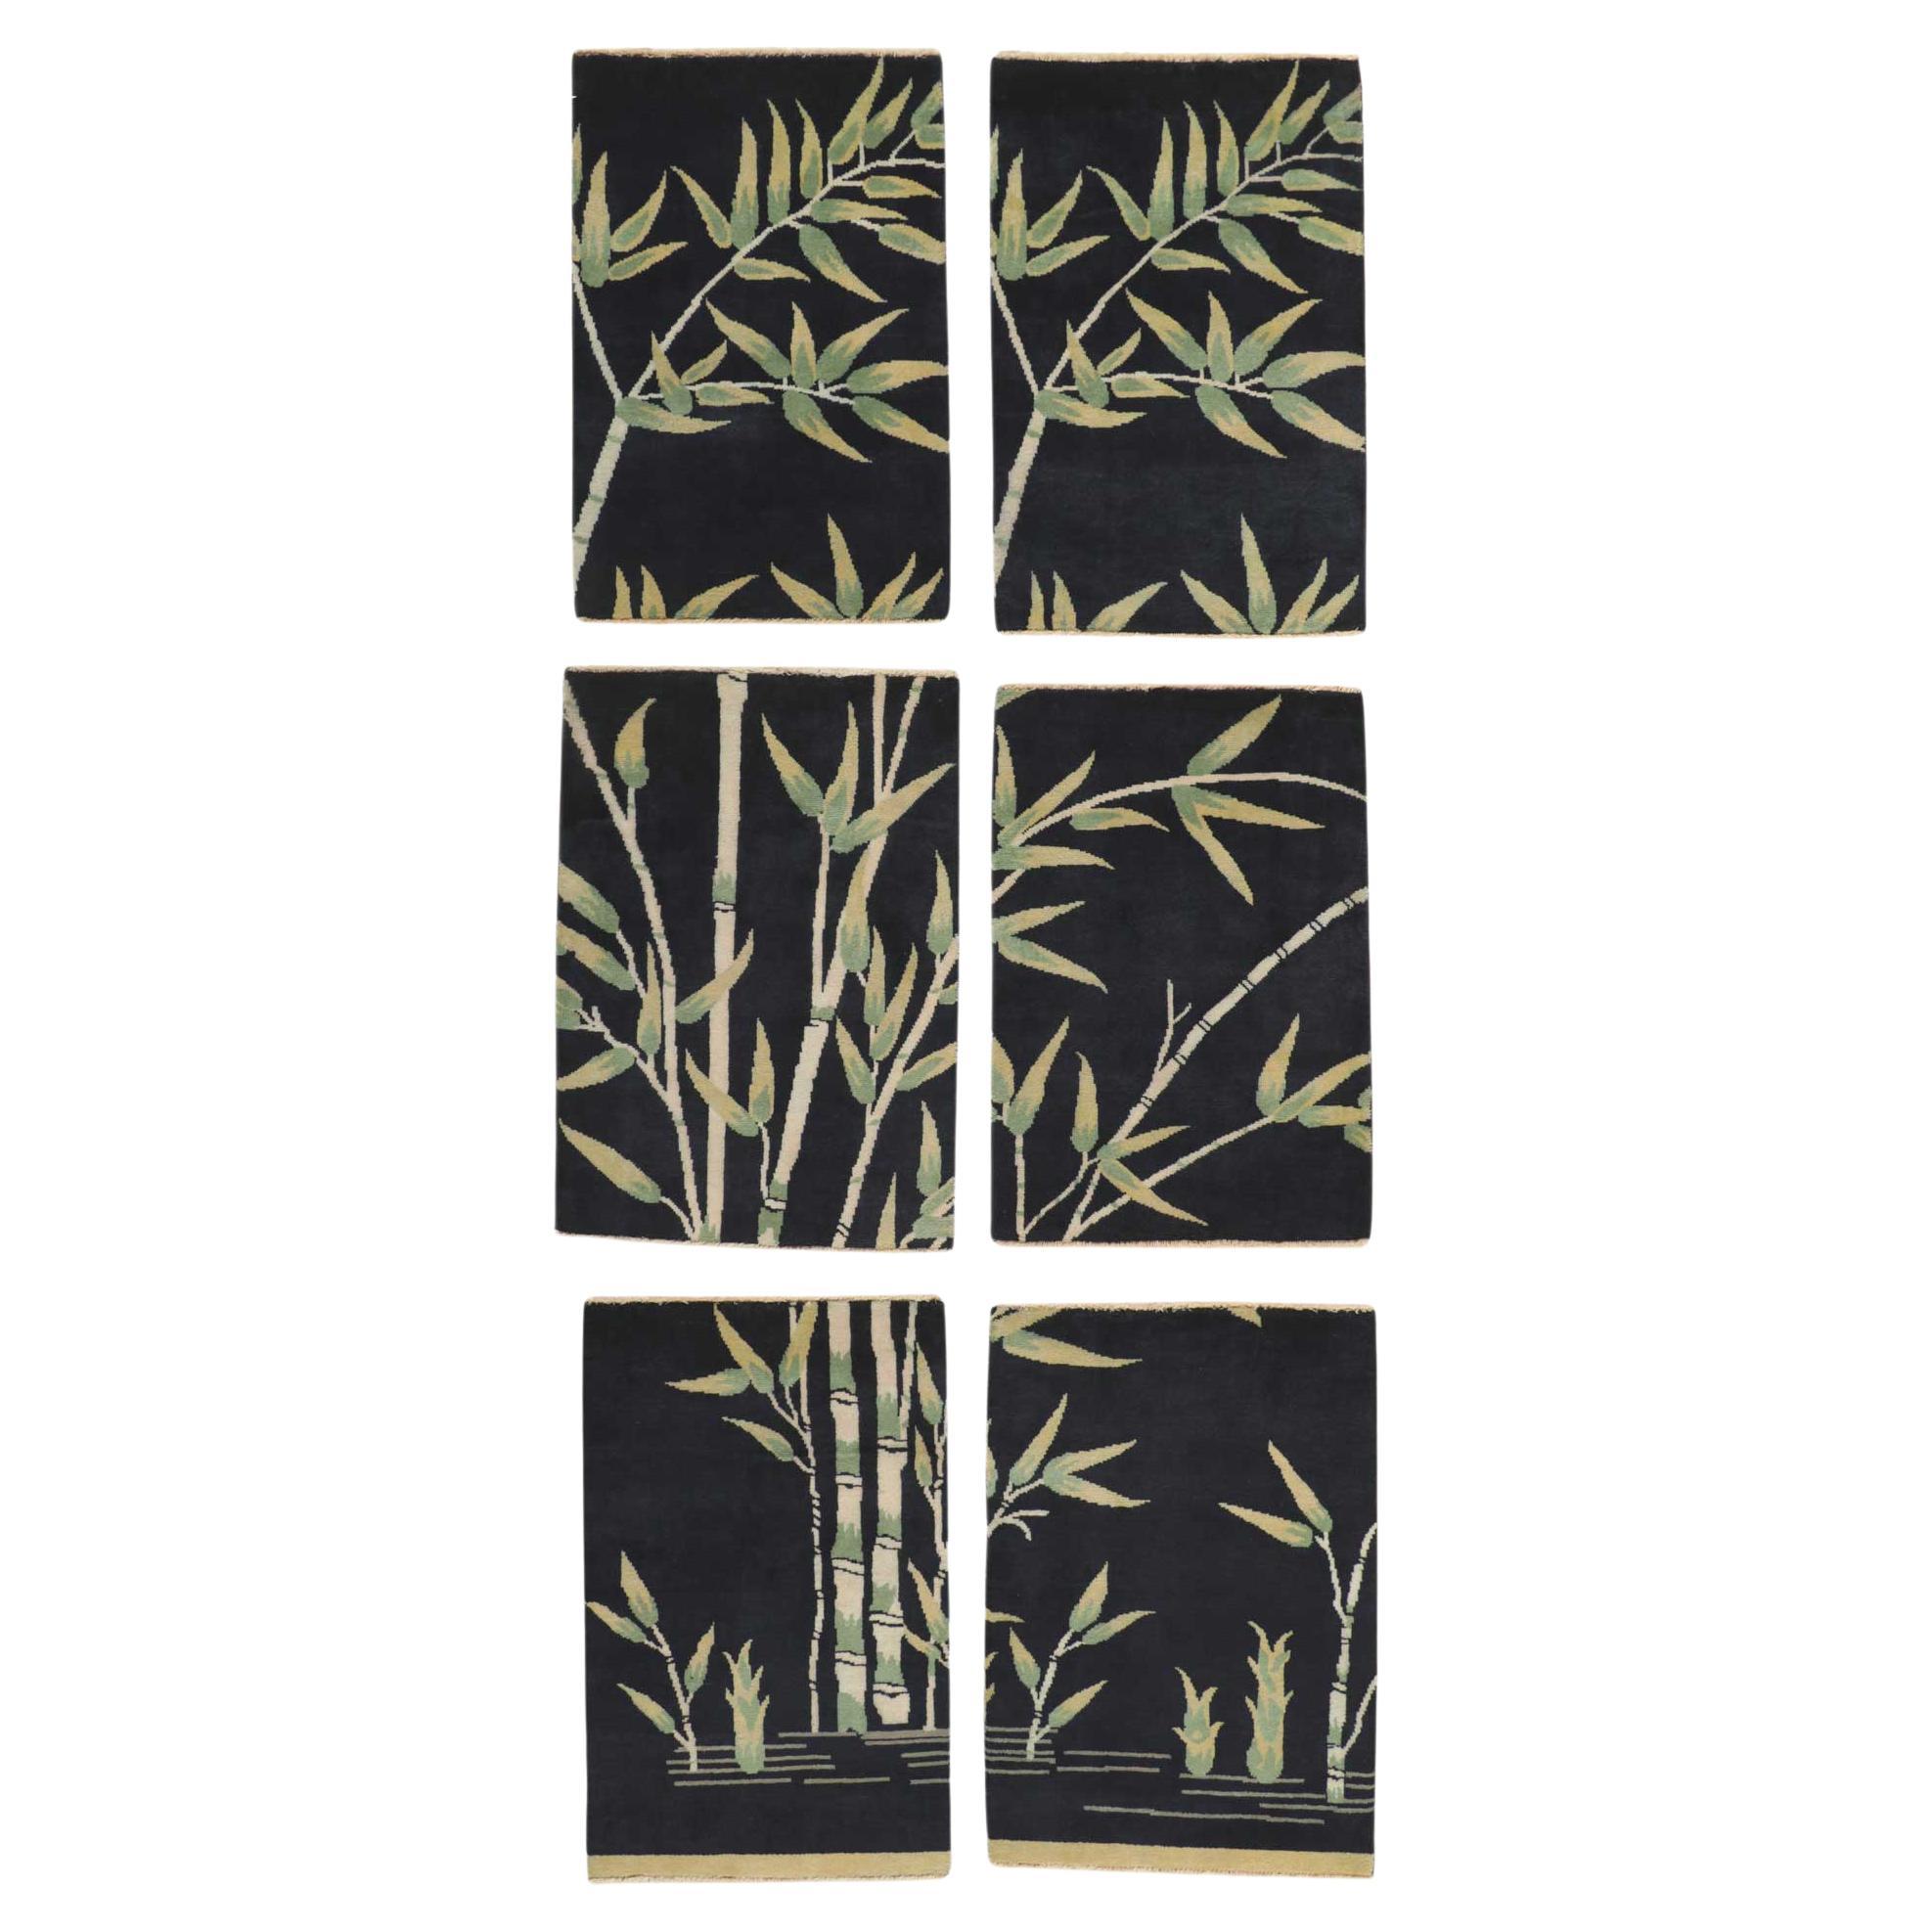 New Chinese Art Deco Rug Set of 6 with Bamboo Pictorial